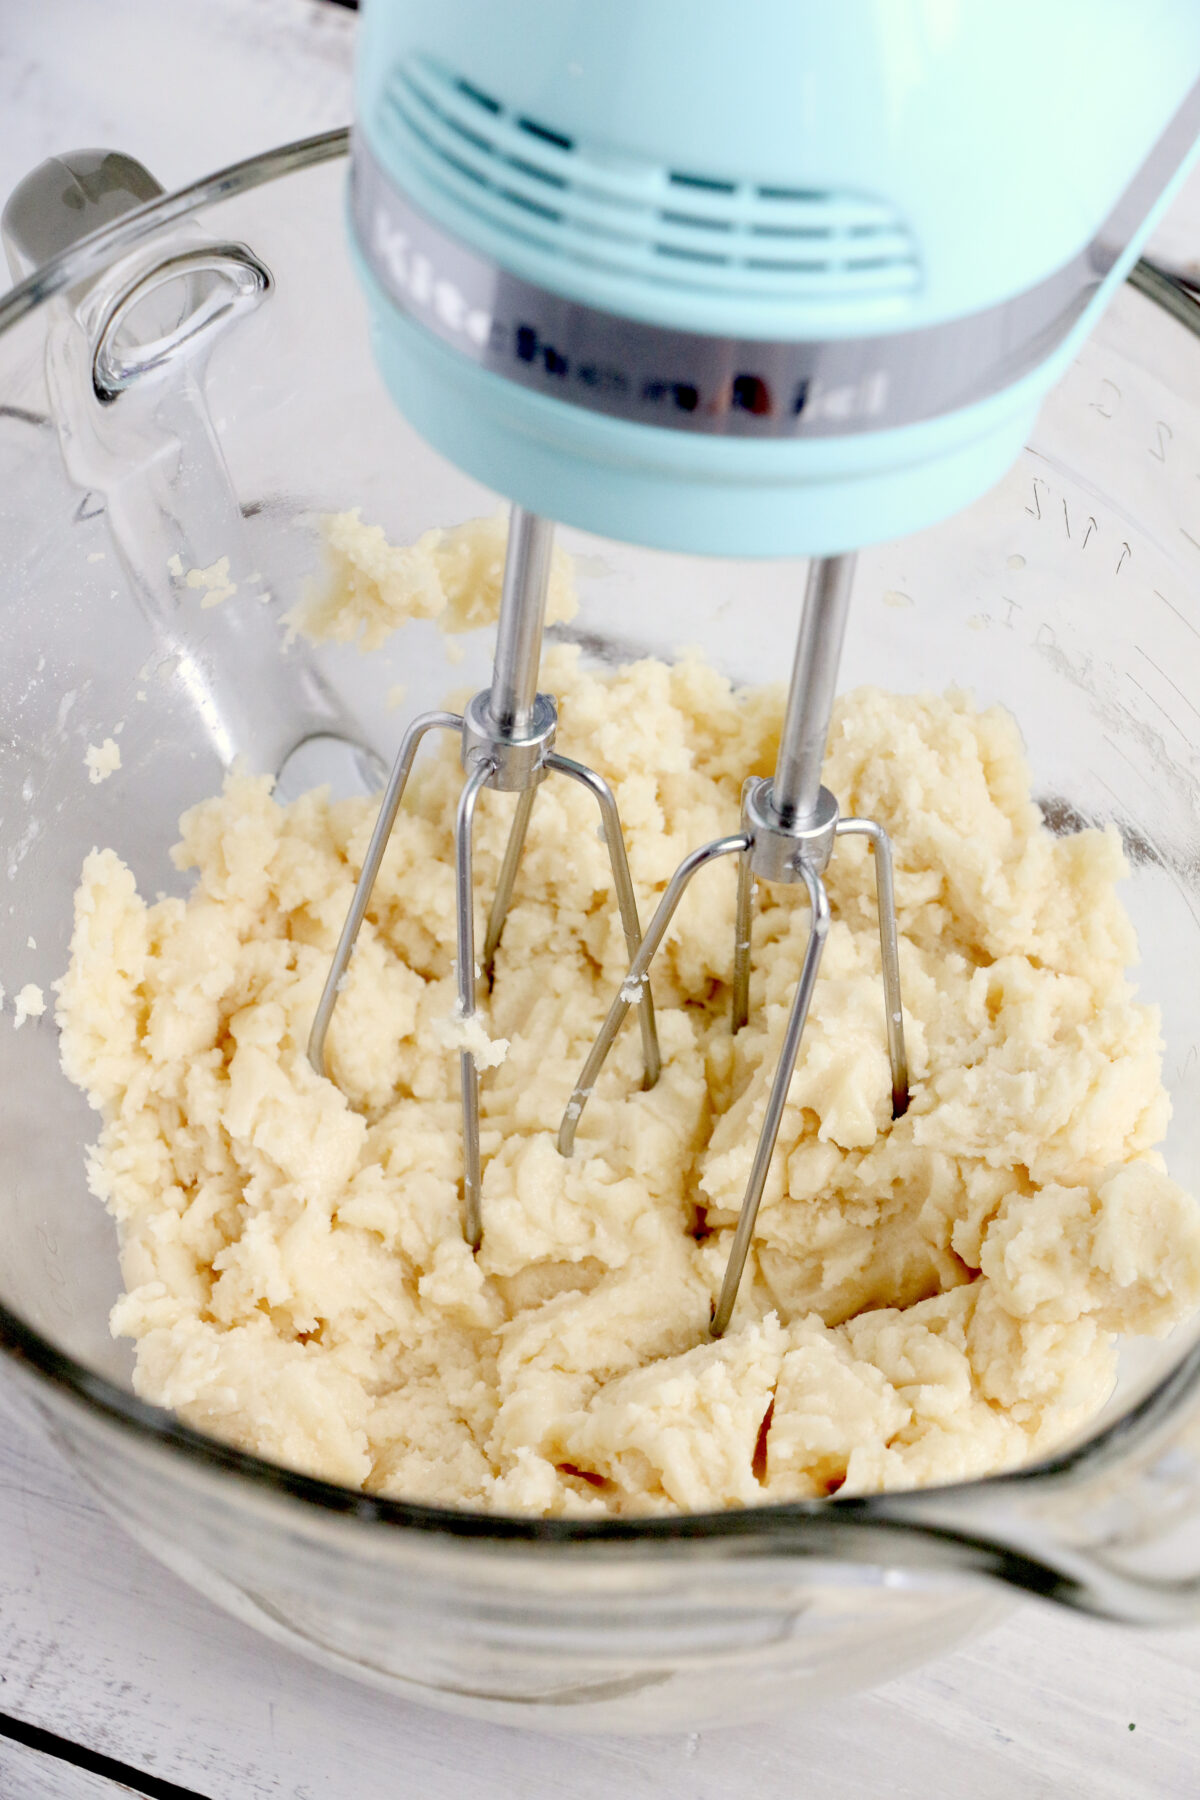 Cake batter being mixed with an electric mixer.